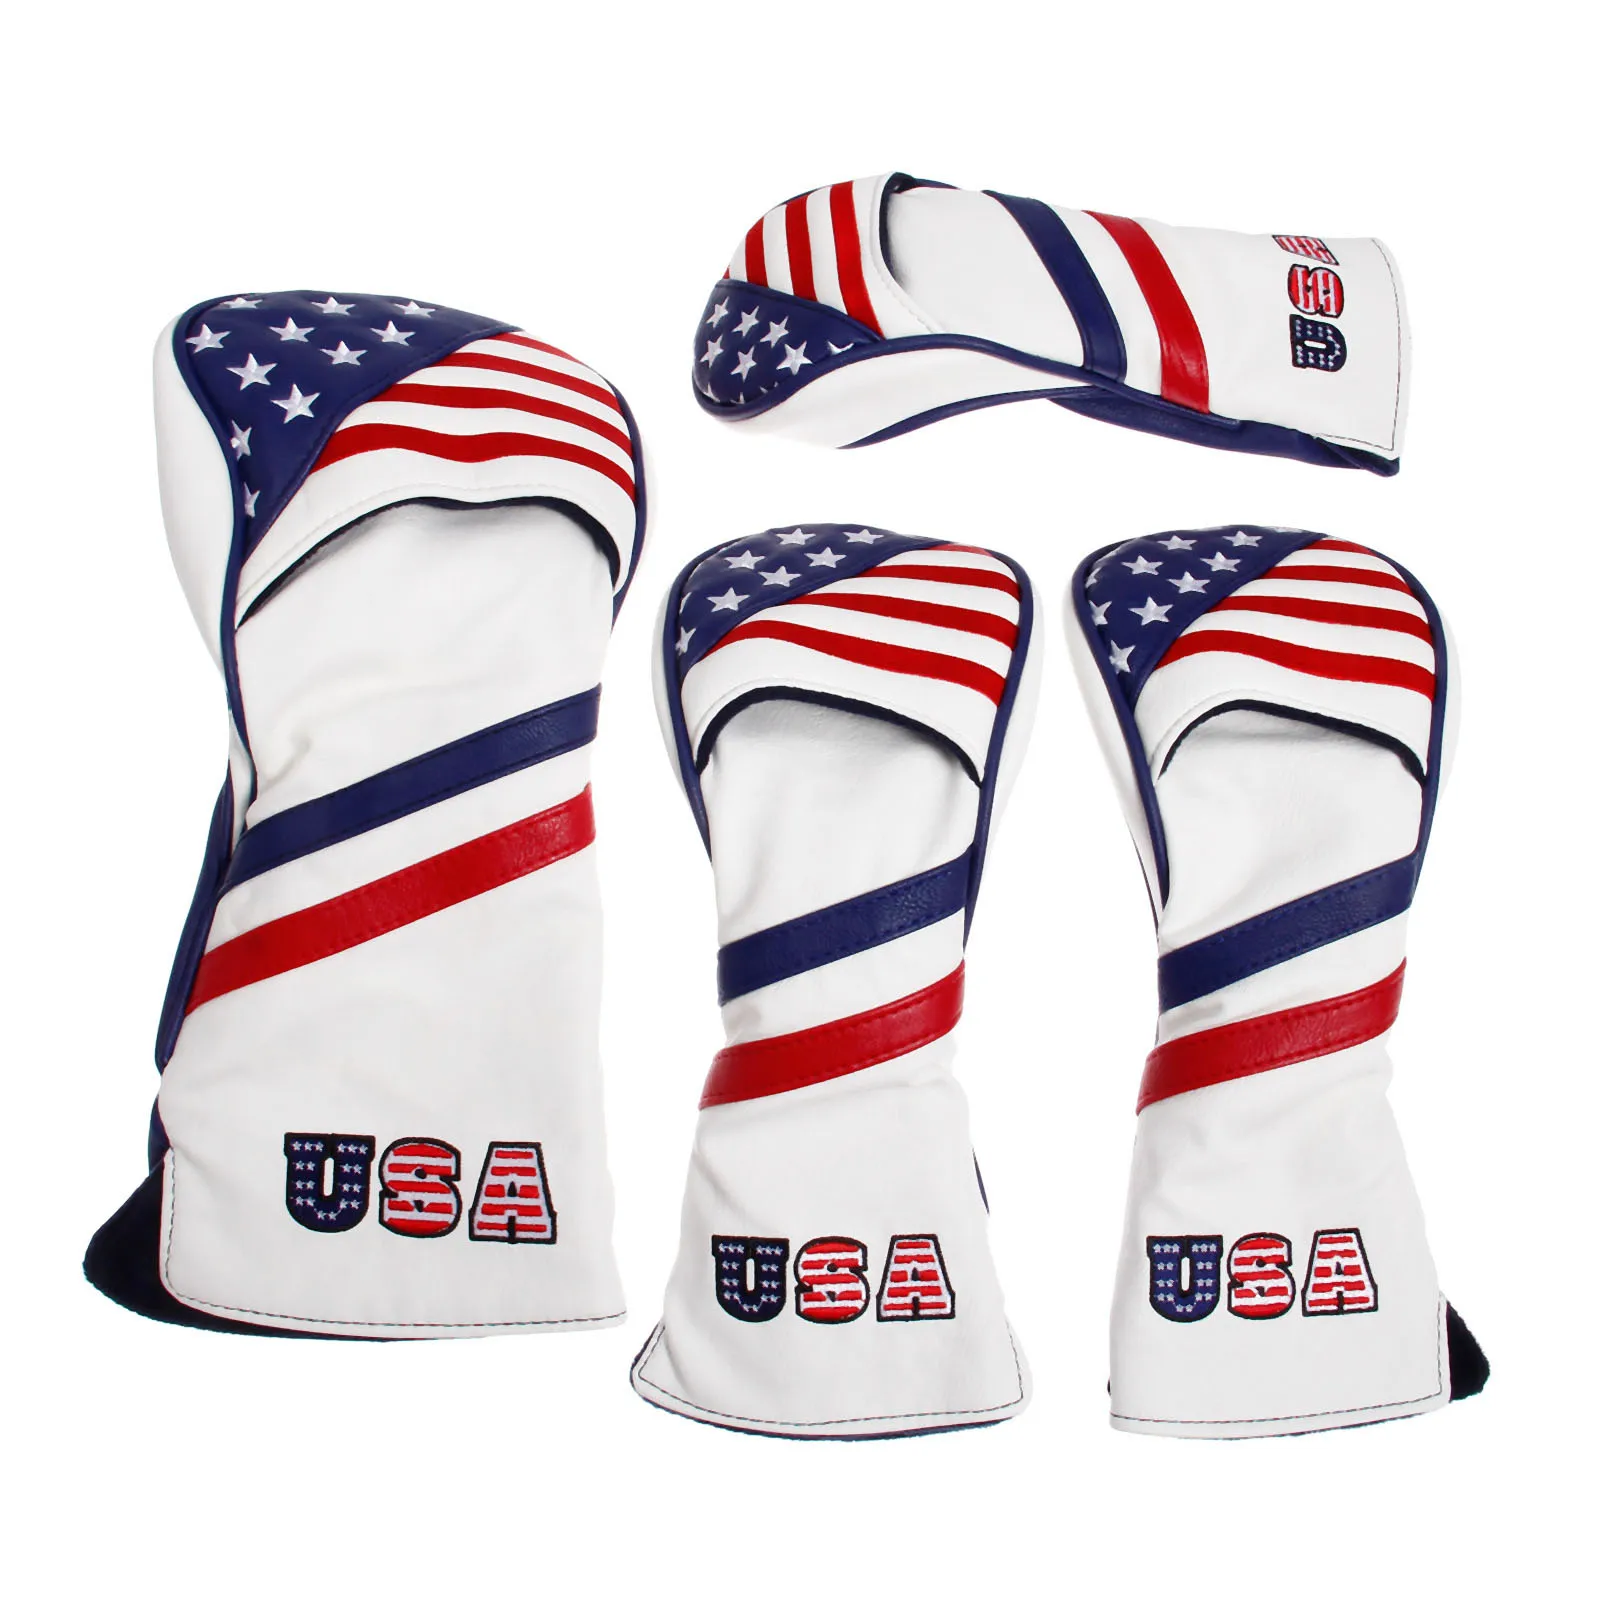 4 Pcs PU Golf Wood Headcover With USA Stars & Stripes Flag Style For 1 Driver Cover & 2 Fairway & 1 Hybrid Club Head Covers Set